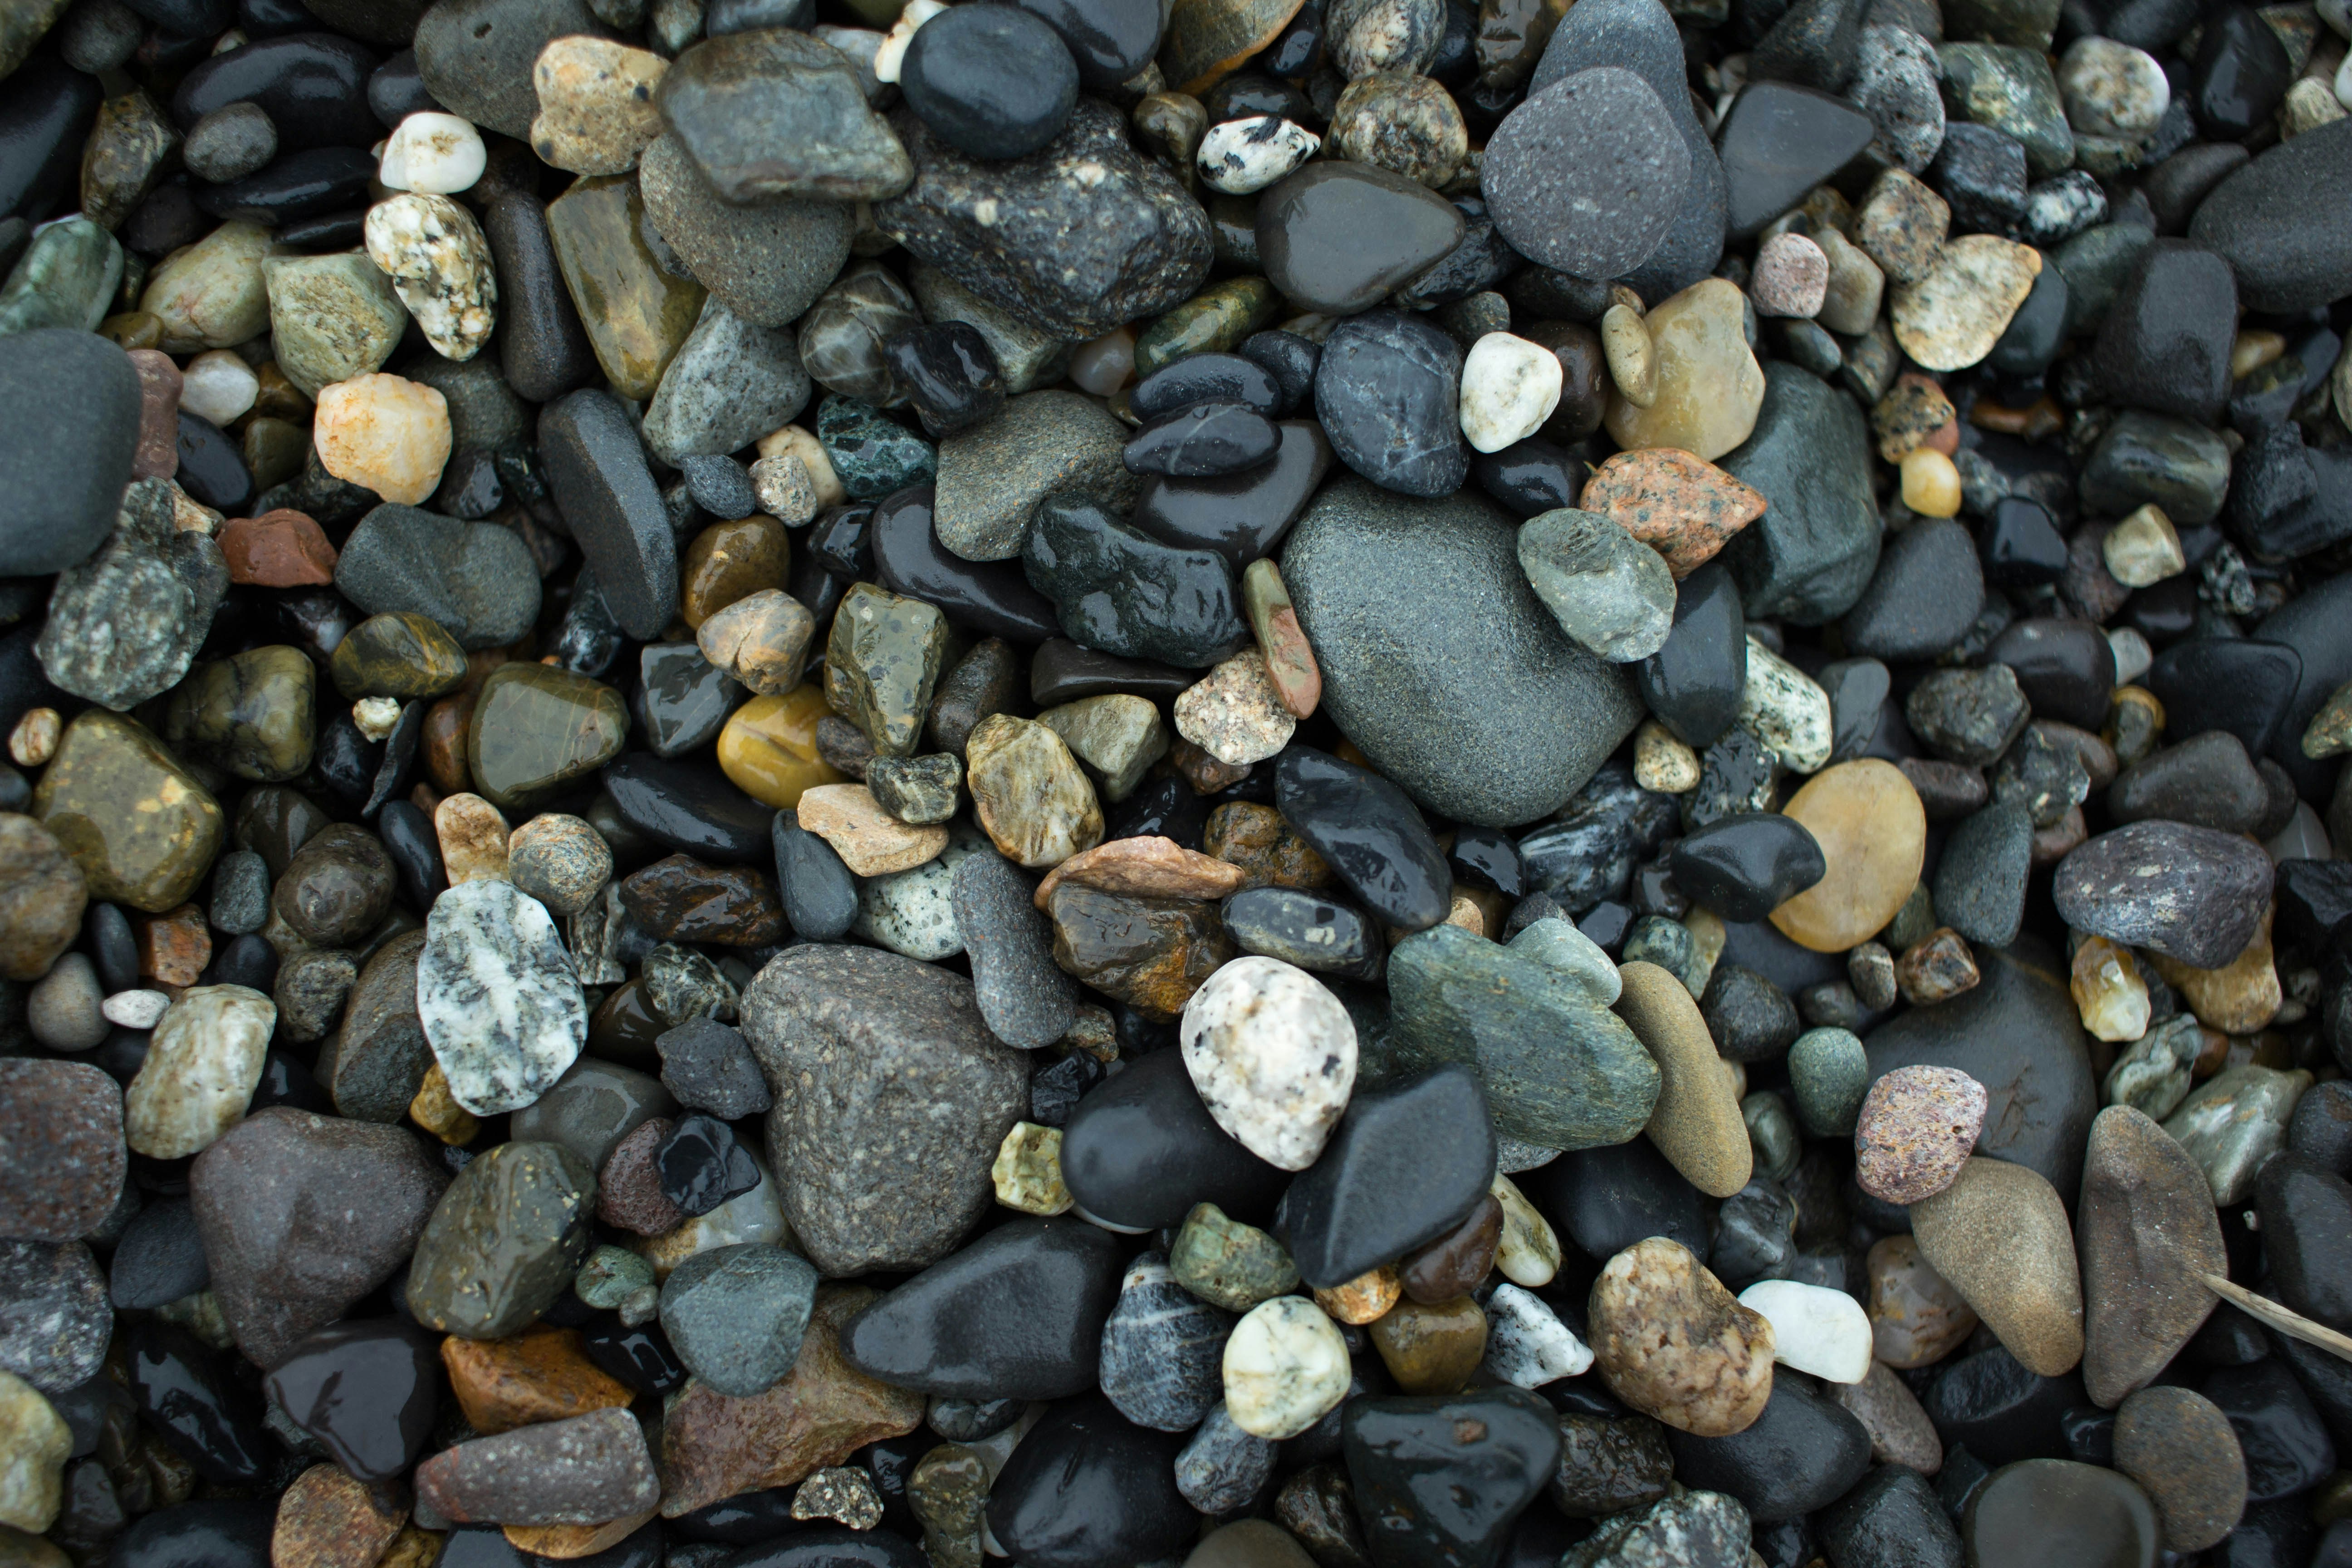 gray and brown stones on the ground